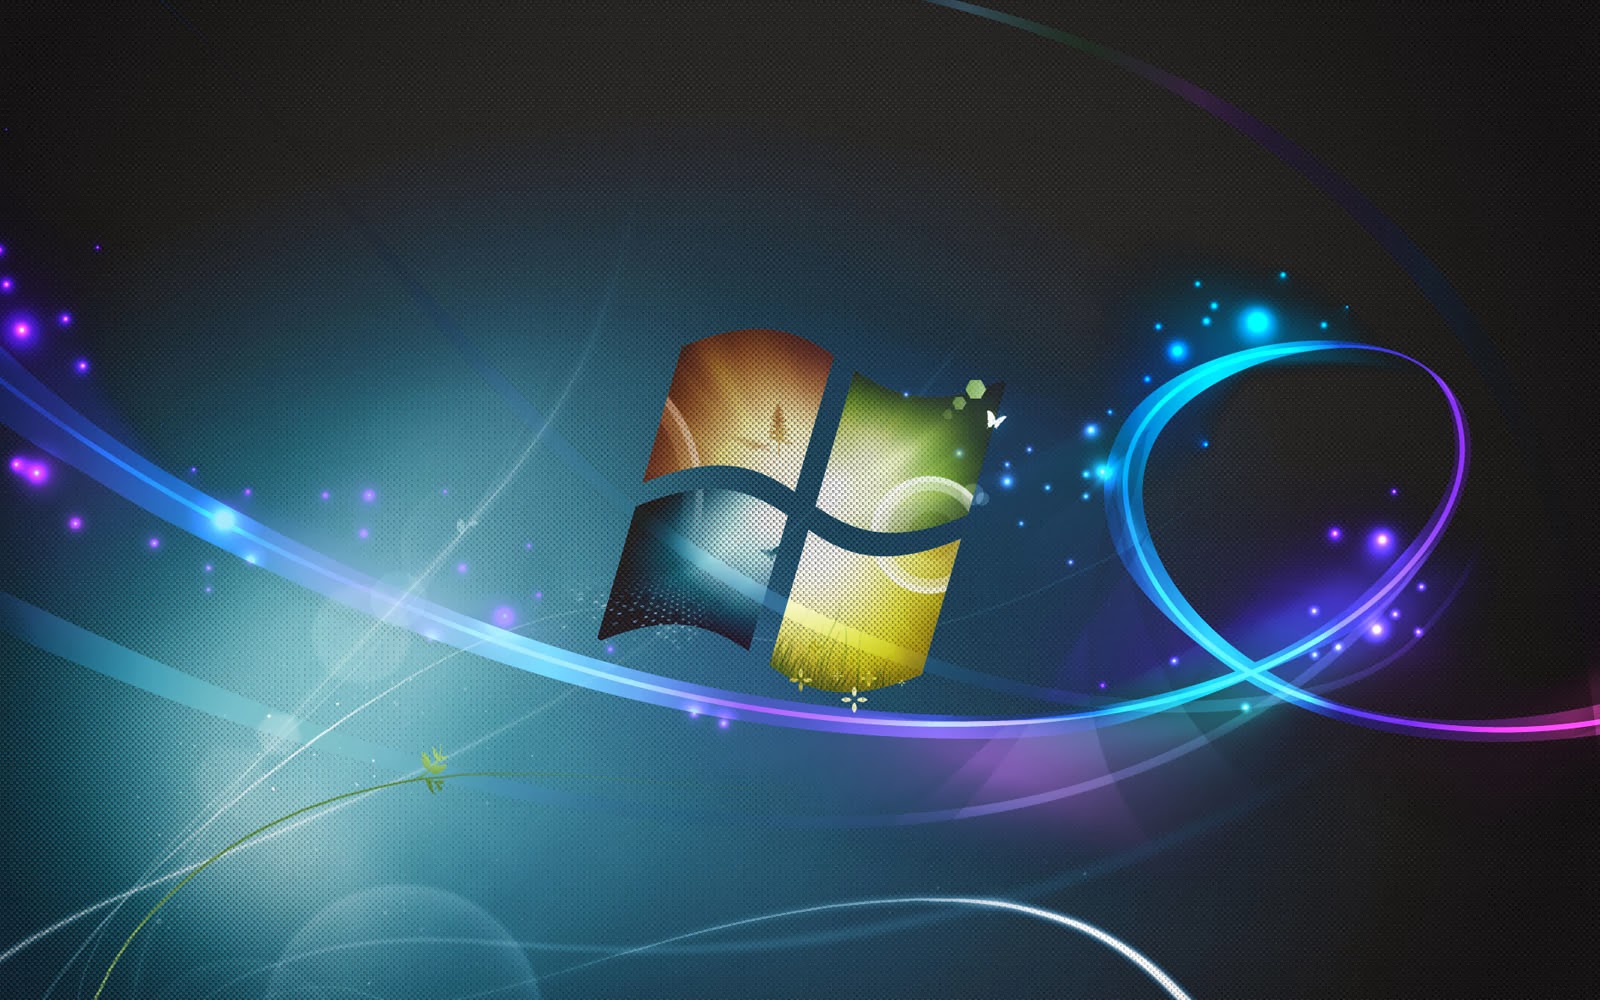 Tag Abstract Windows Wallpaper Background Photos Image And